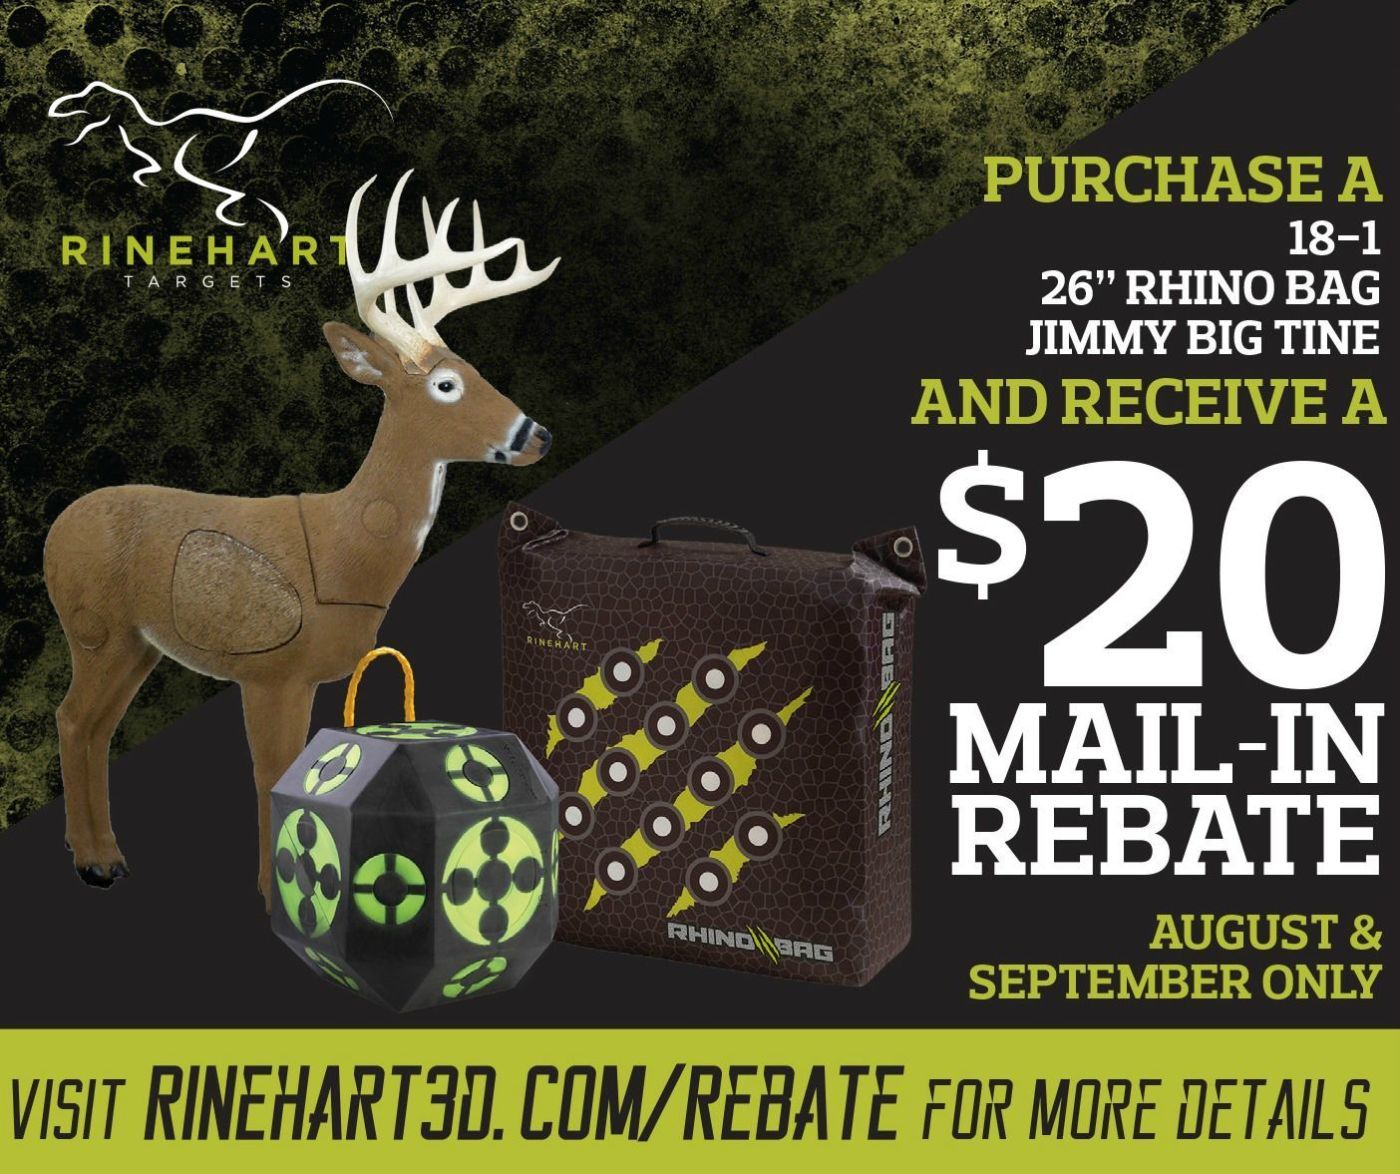 2019-mail-in-rebate-offers-from-rinehart-targets-archery-business